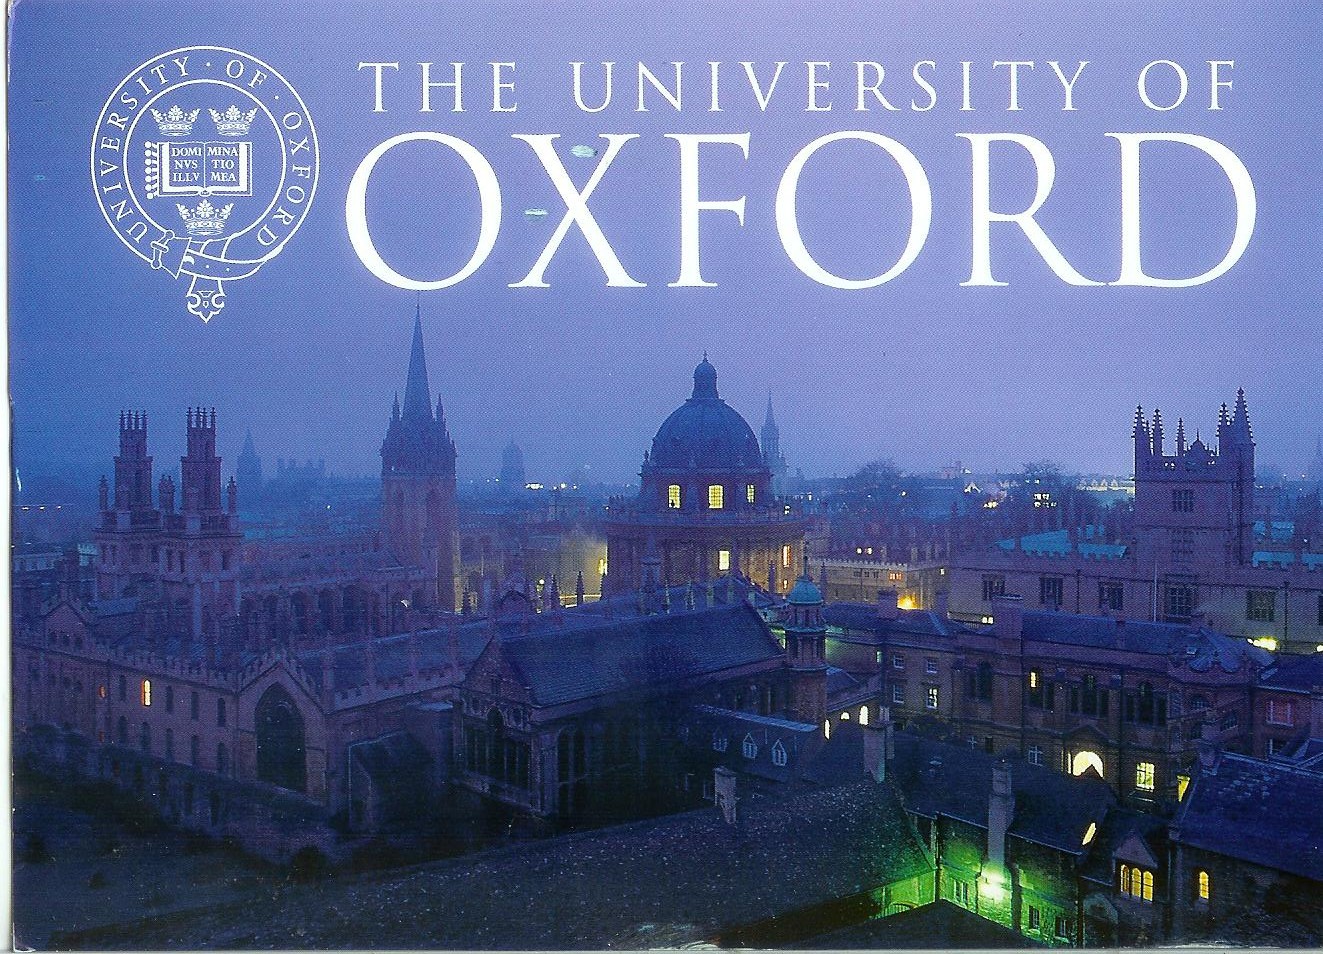 Postdoctoral Research Position at University of Oxford in UK, 2018